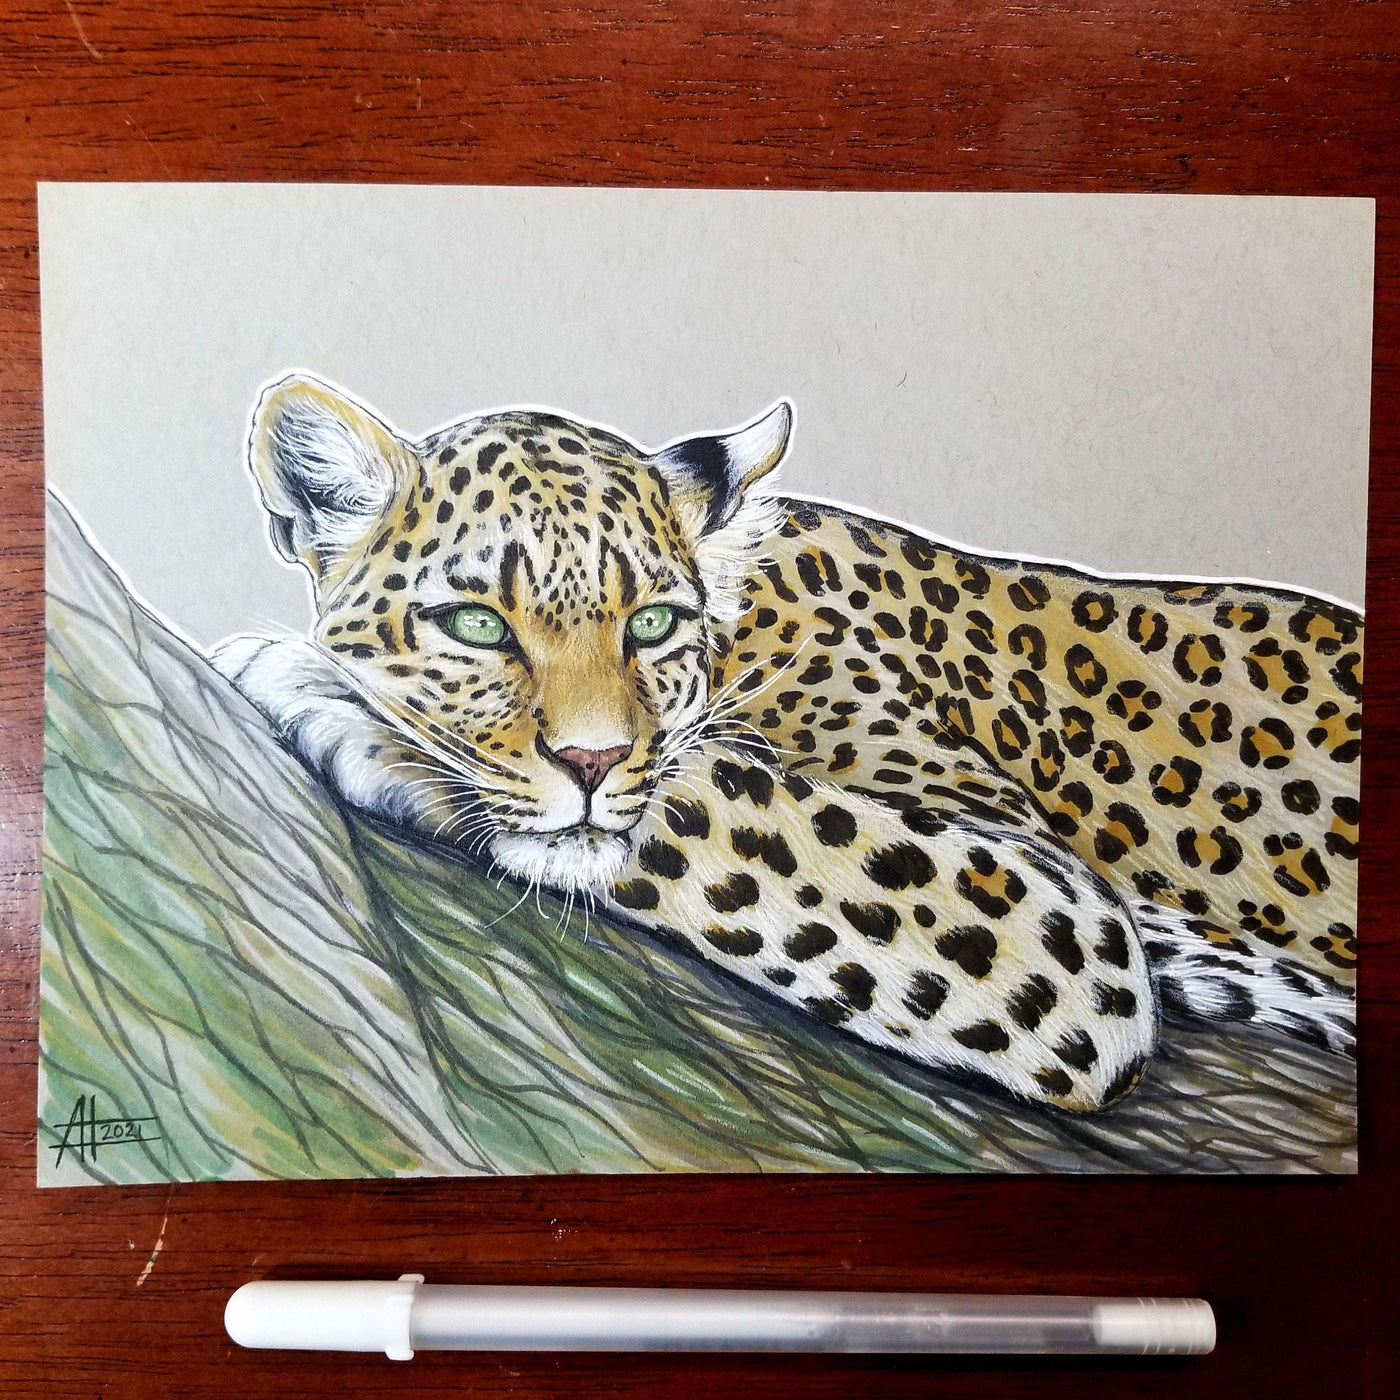 Young Leopard - Original Marker Painting by Amanda Lanford resting on a tree branch, positioned beside a marker pen on a wooden surface.